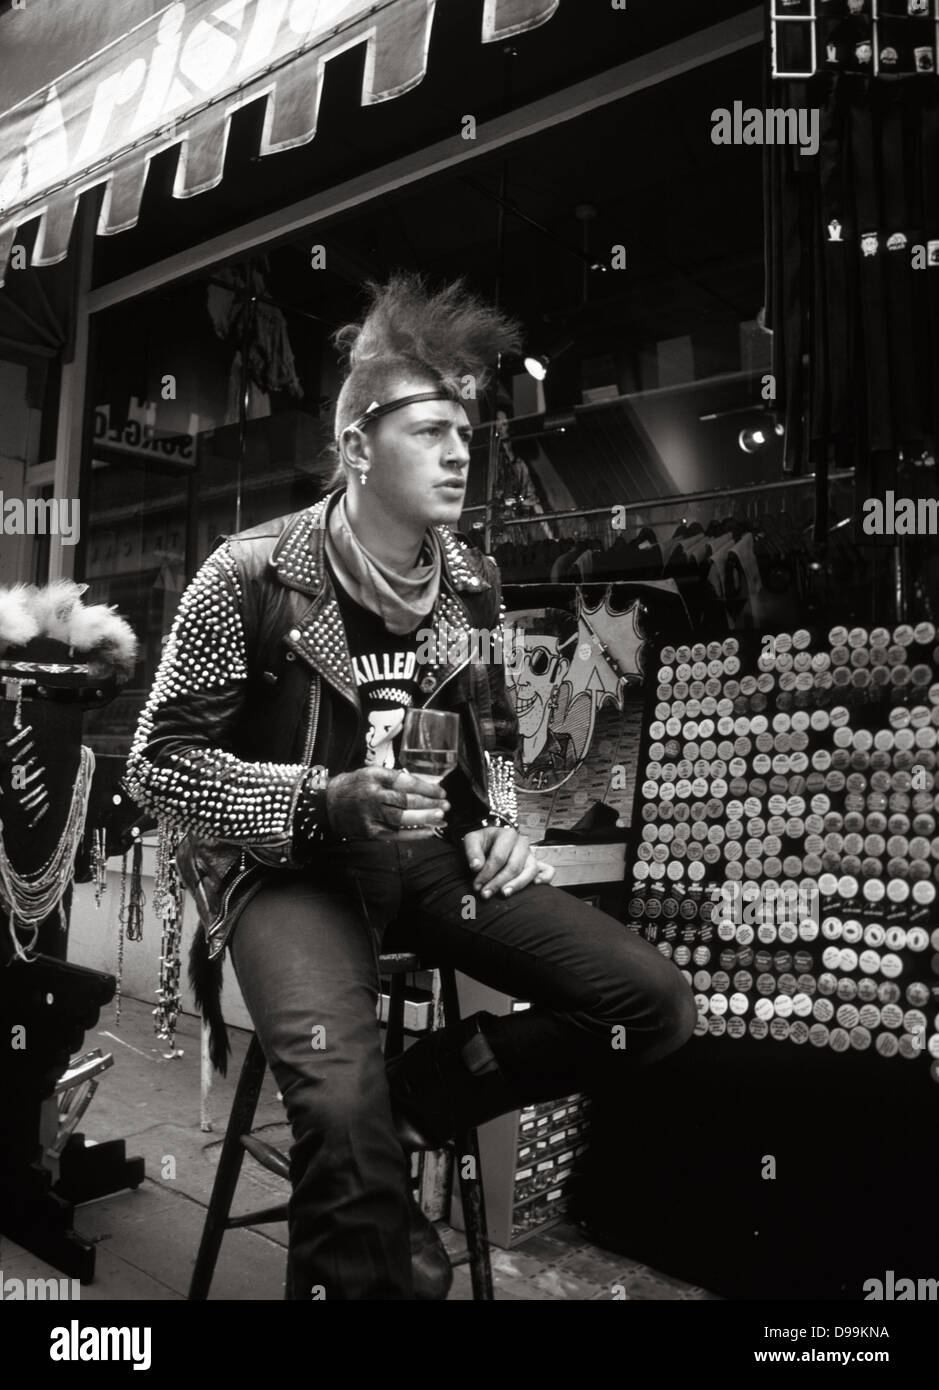 King's Road punk with mohican hairstyle in Chelsea, London, 1981 Stock Photo